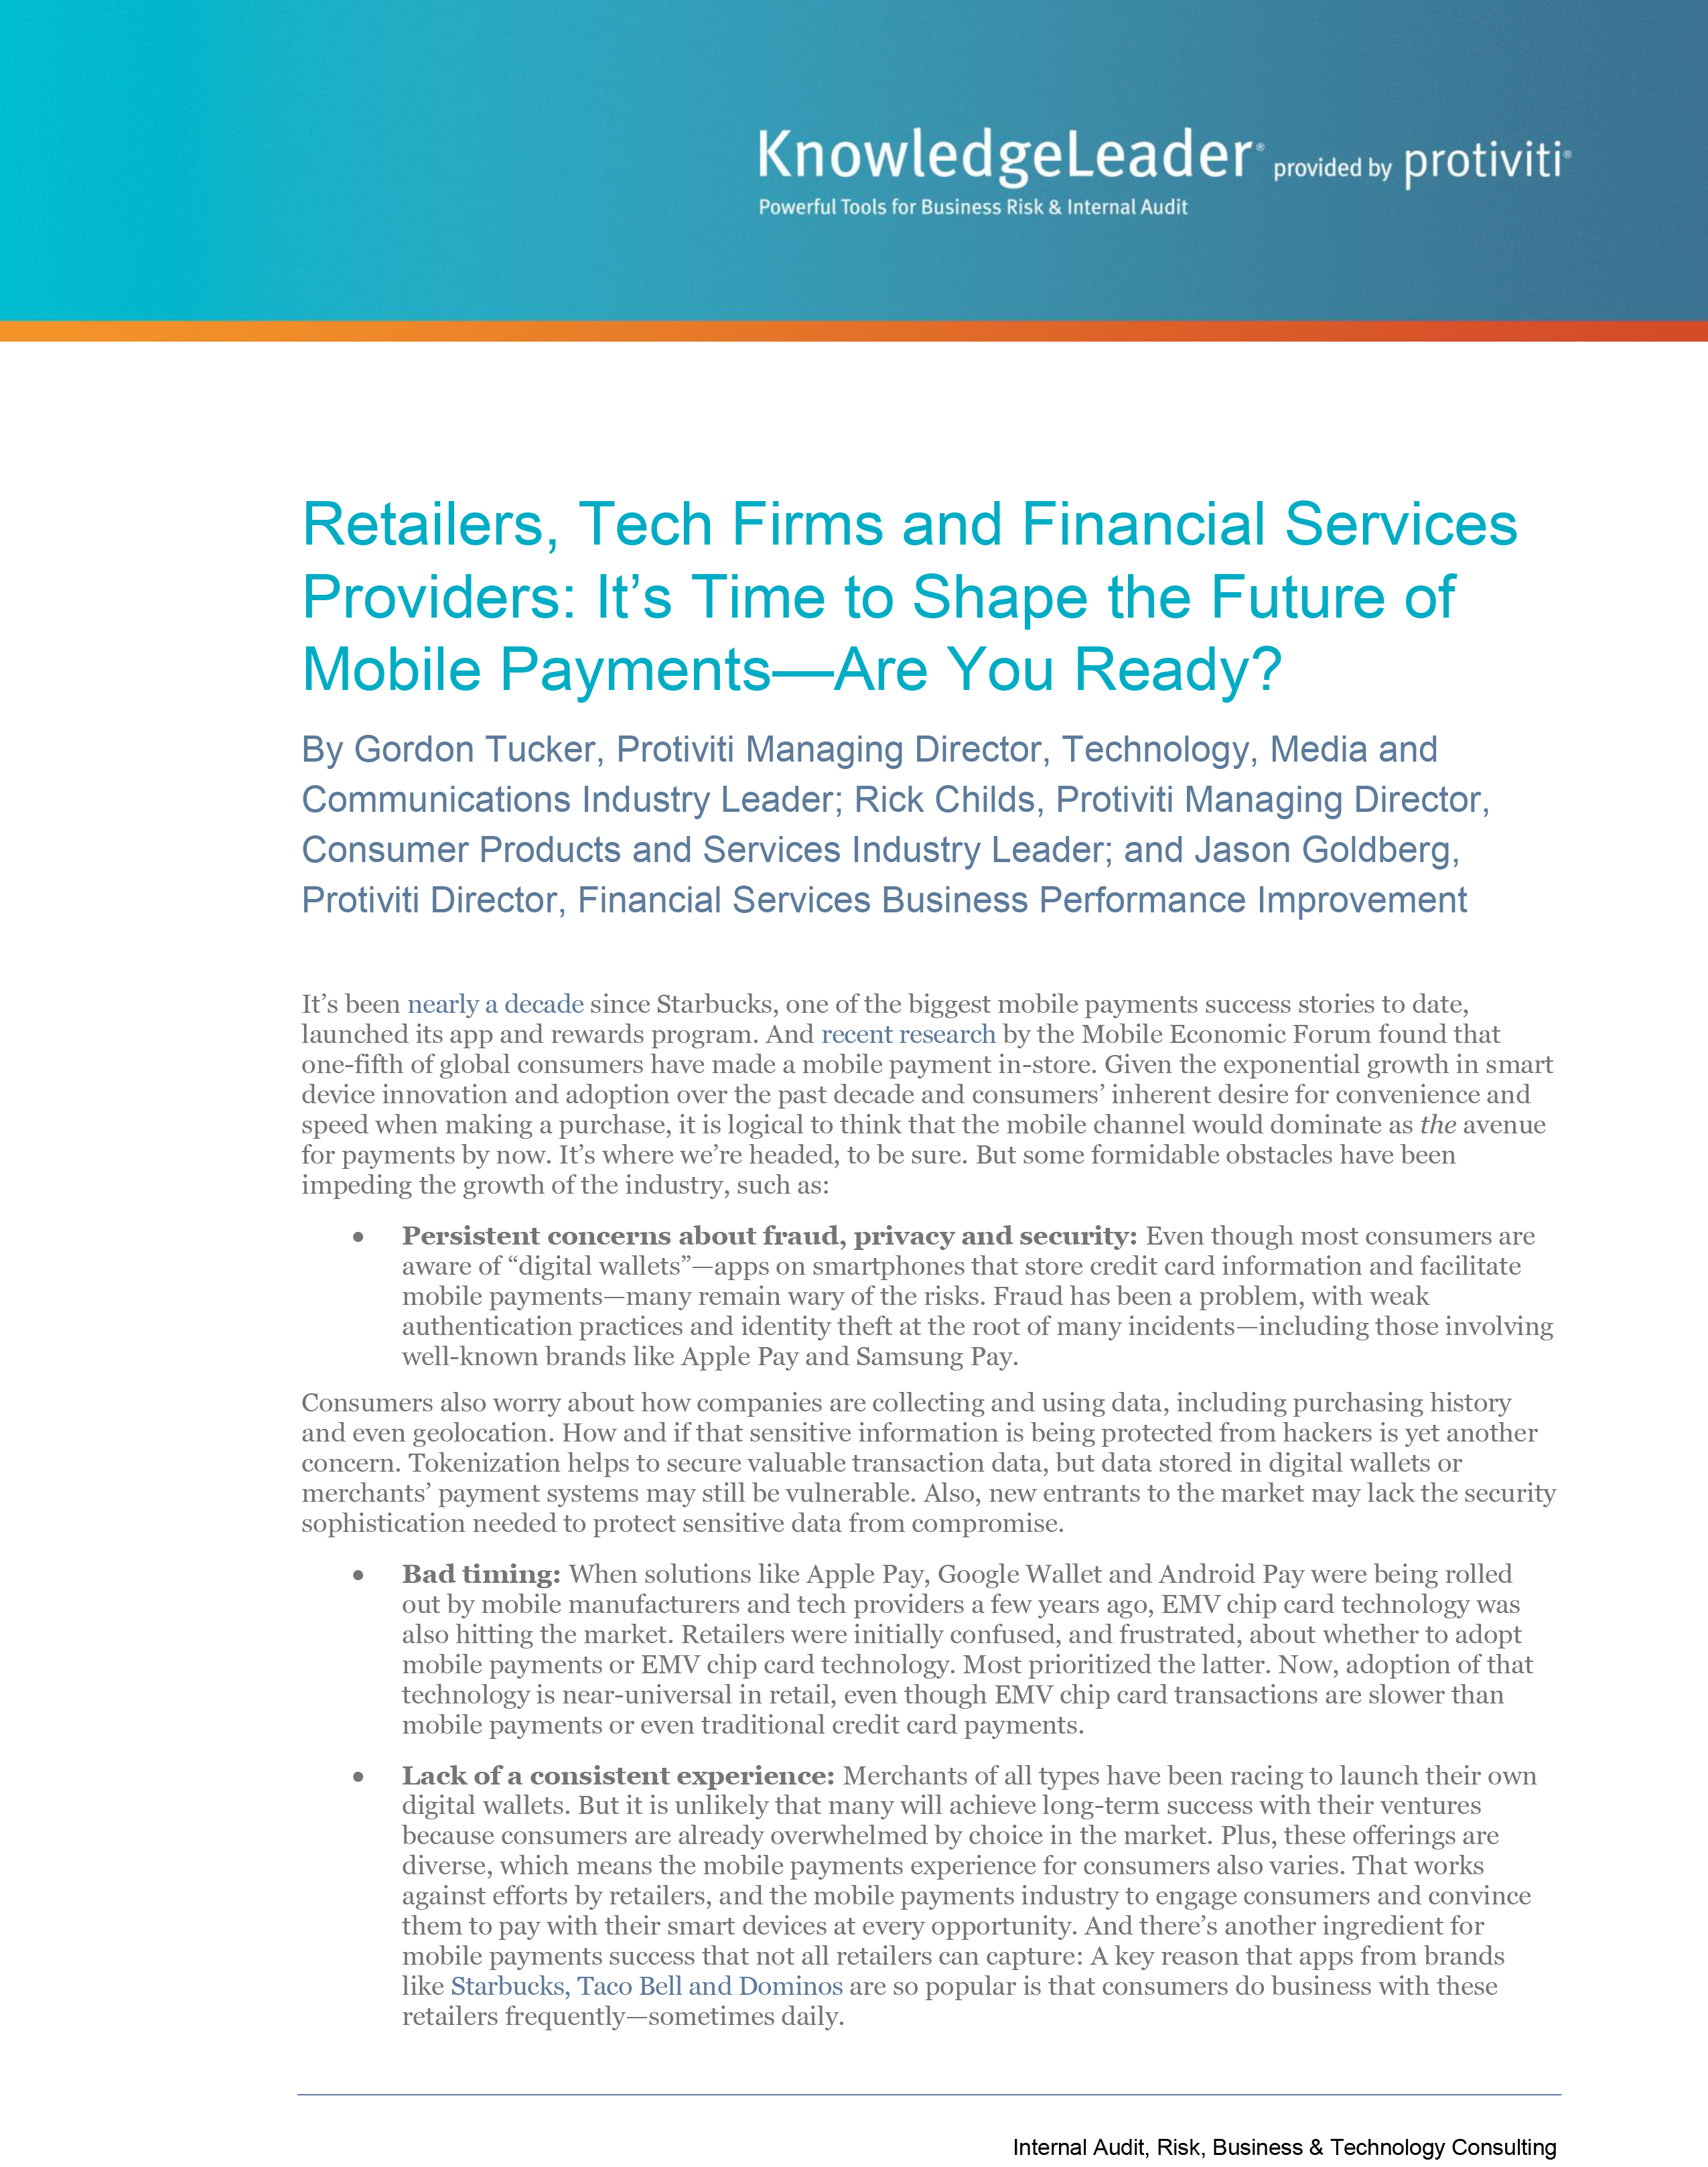 Screenshot of the first page of Retailers, Tech Firms and Financial Services Providers - It’s Time to Shape the Future of Mobile Payments